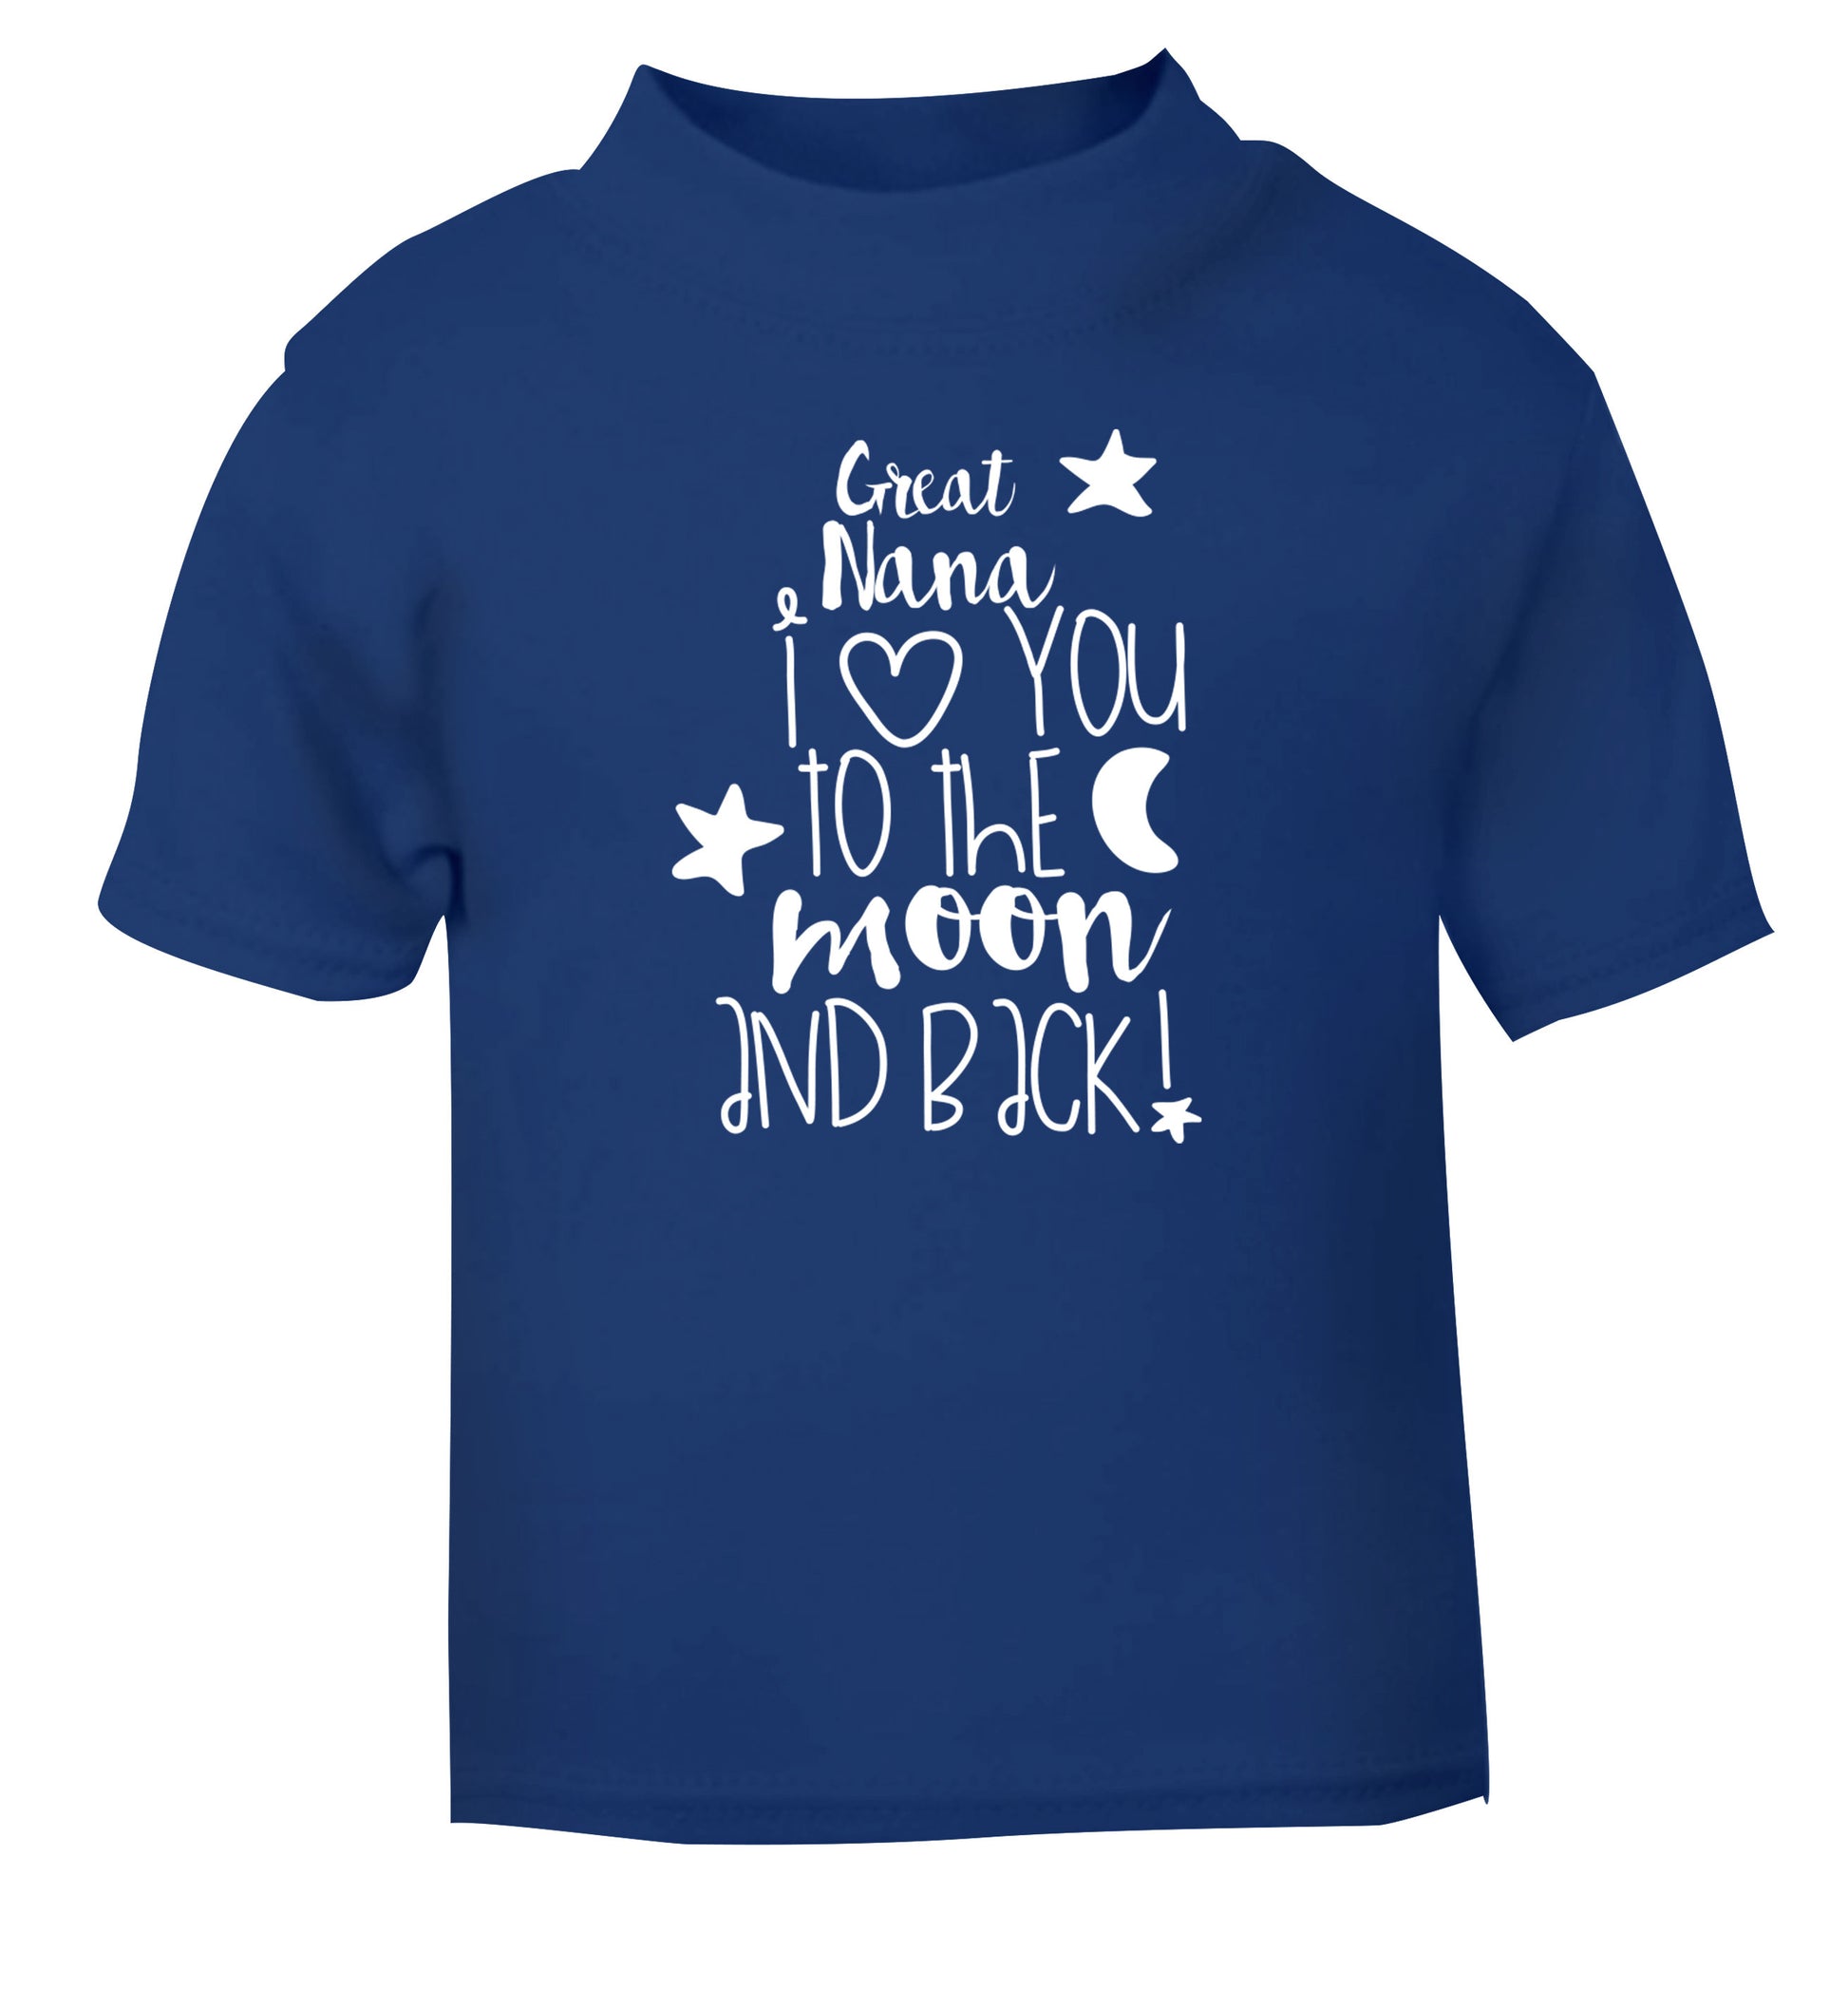 Great Nana I love you to the moon and back blue Baby Toddler Tshirt 2 Years